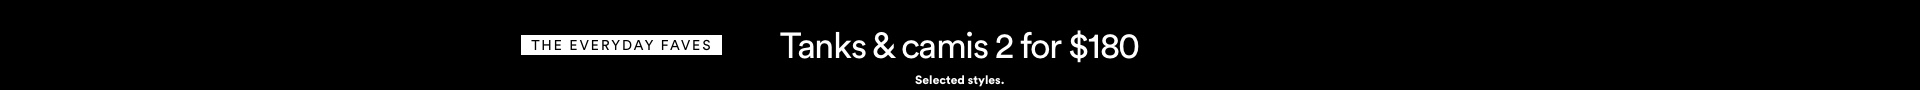 Tanks & camis 2 for $180. T&Cs Apply. Click to Shop.